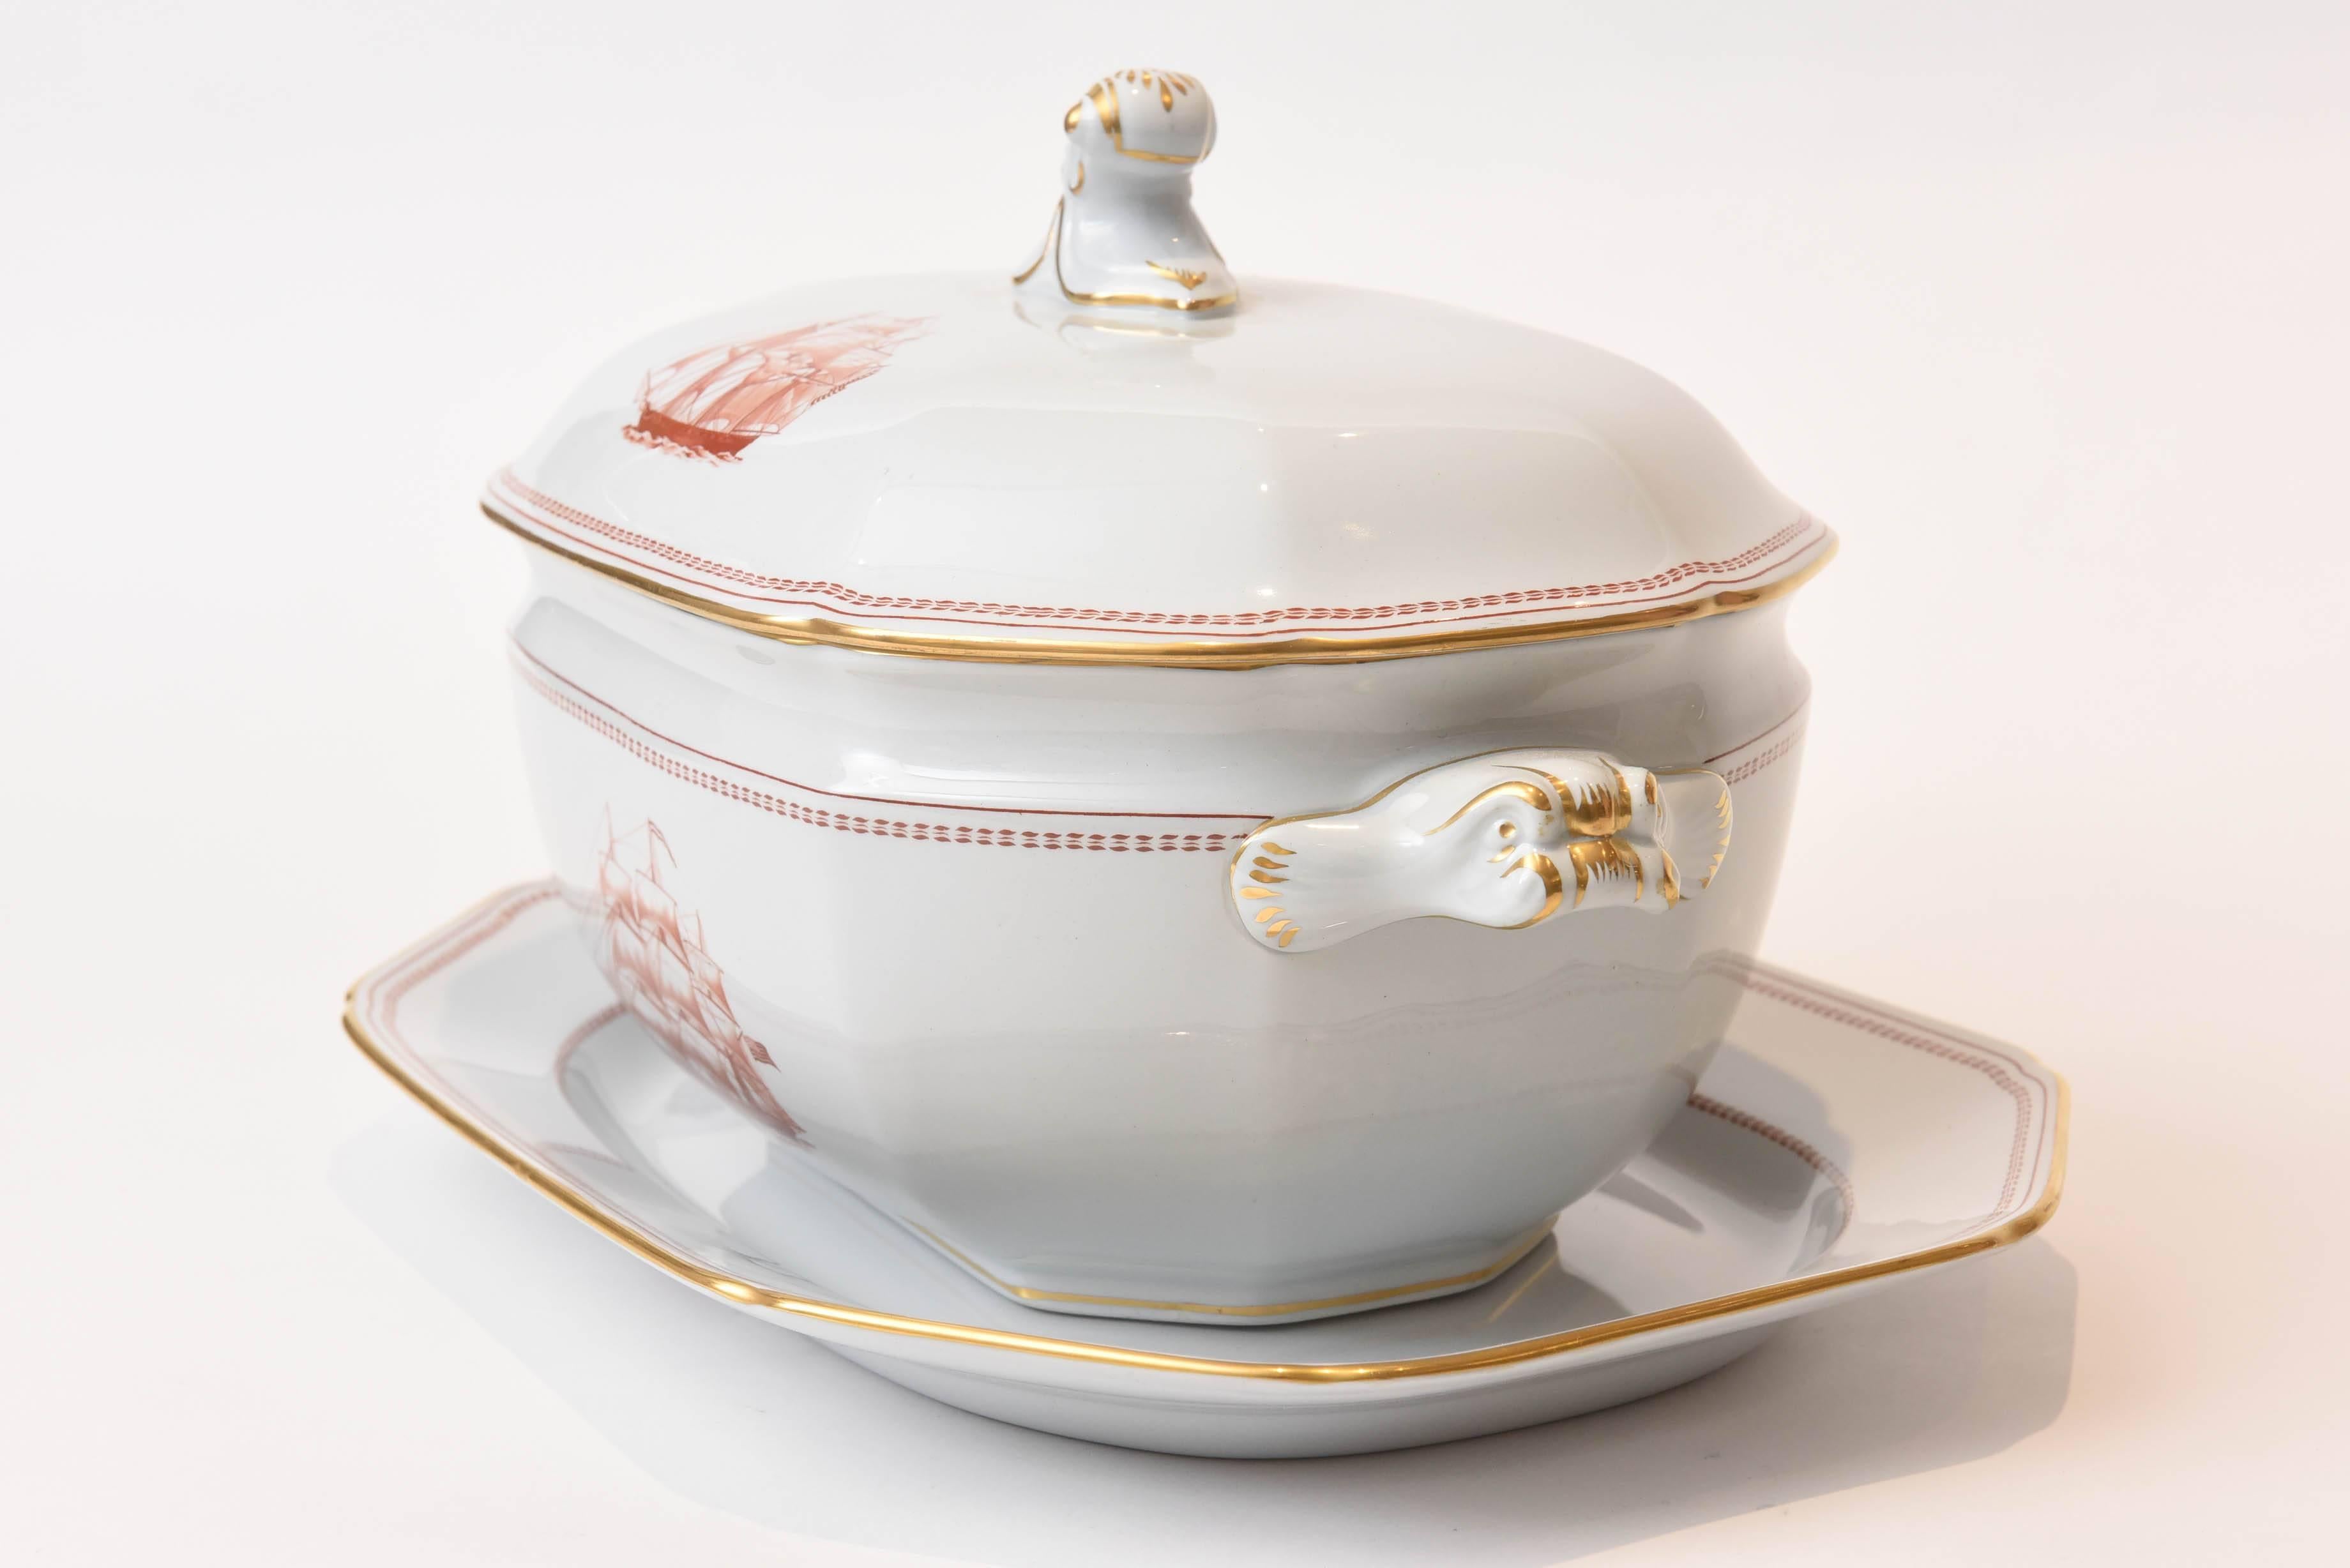 Chinese Export Spode, England Soup Tureen and Platter 